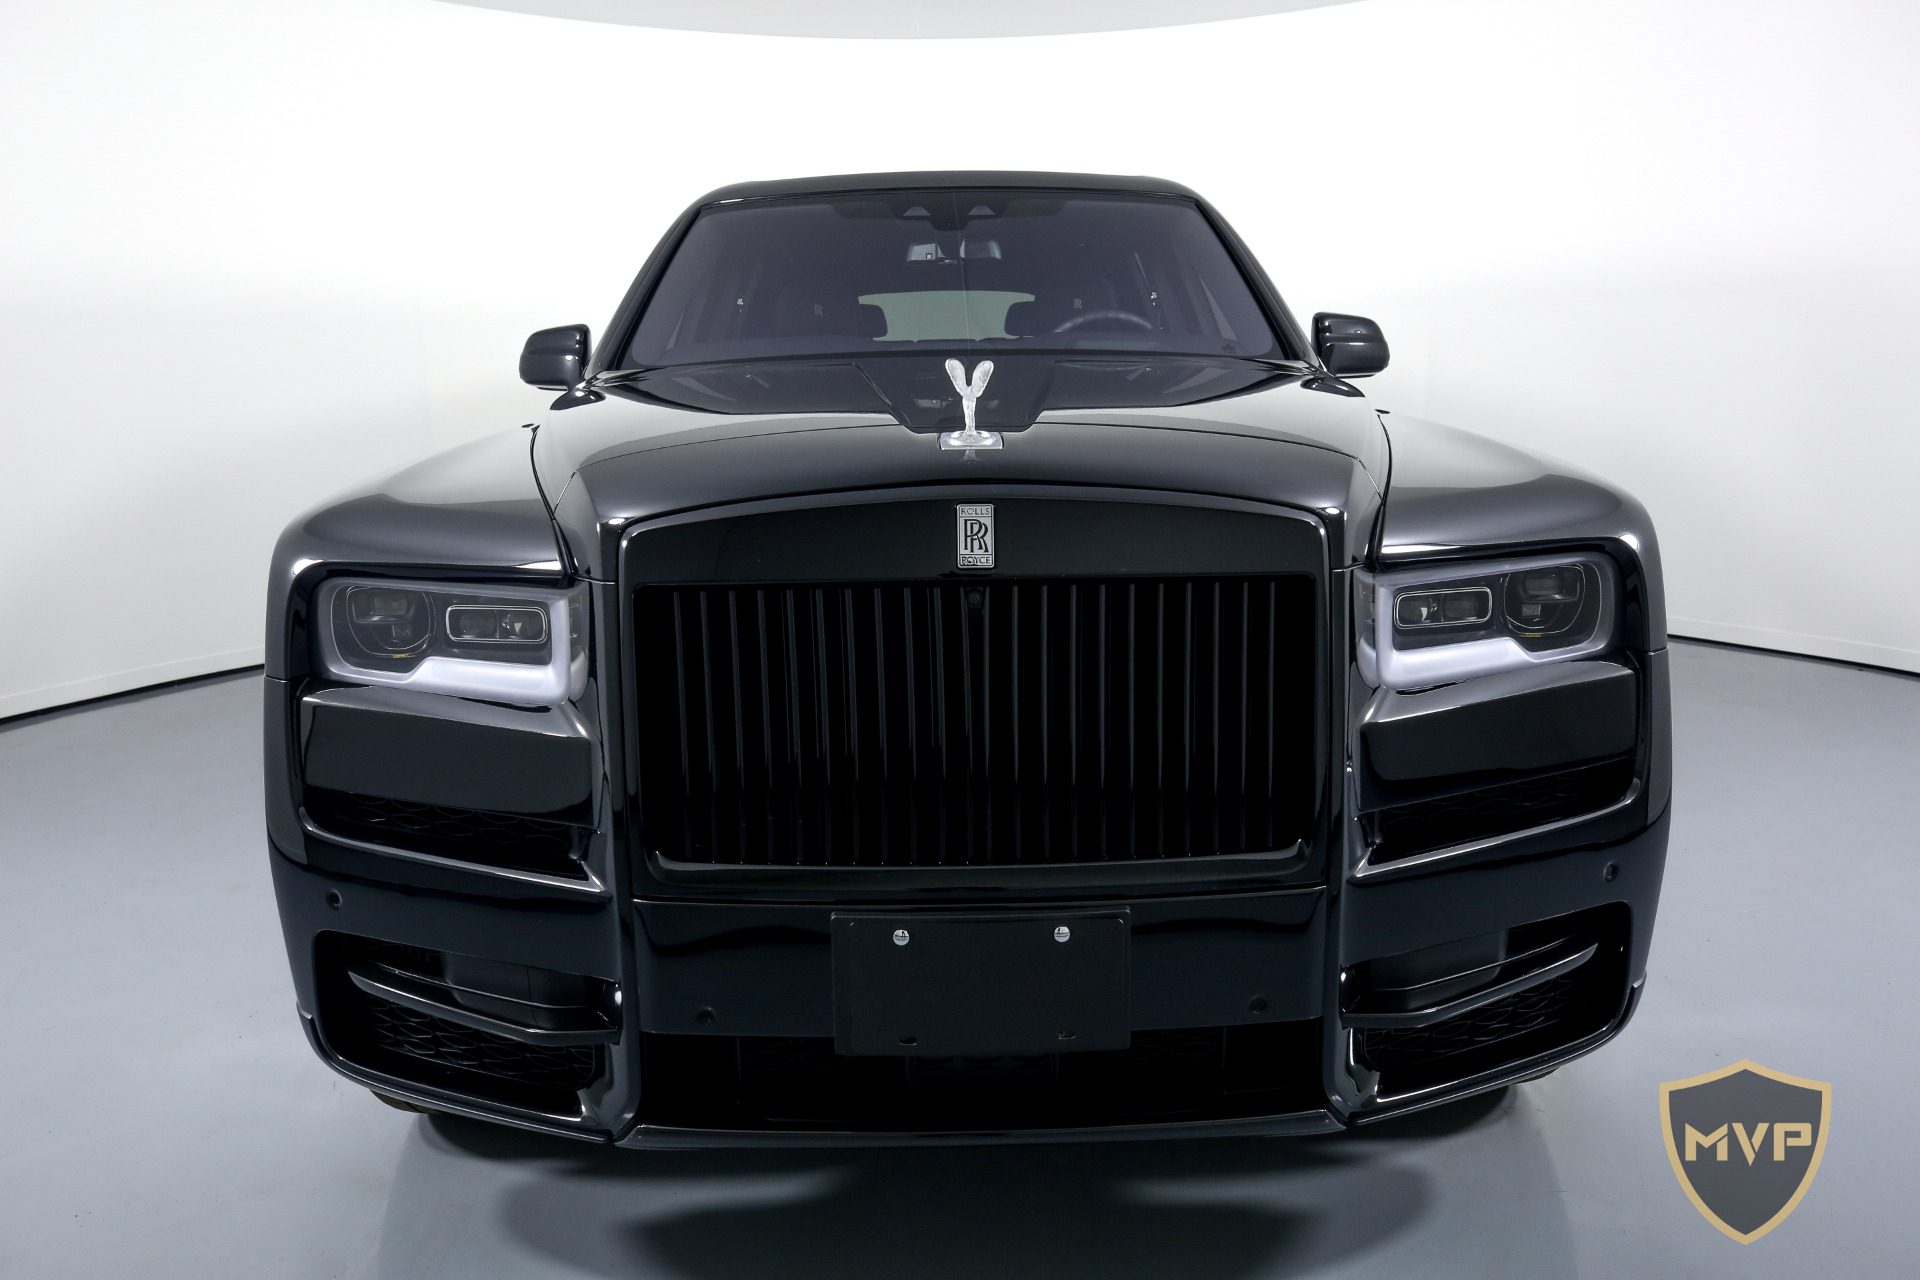 Nothing Says Rich Like the 2019 RollsRoyce Phantom Heres What You Get  and How Much It Costs  altdriver